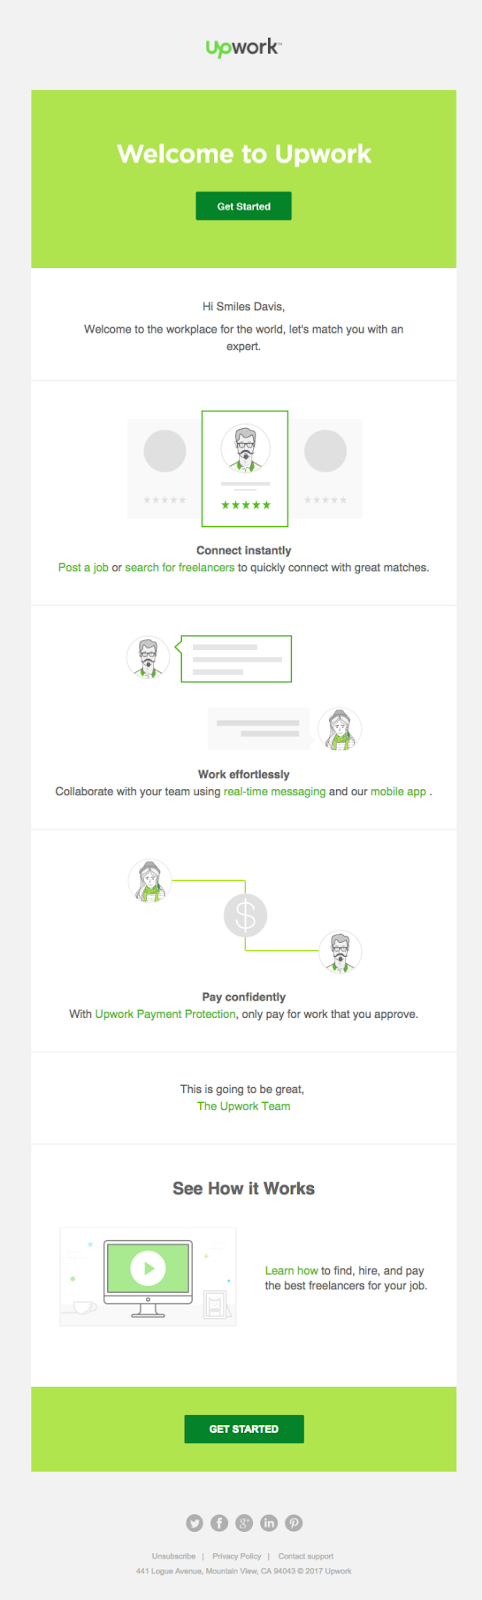 Upwork marketplace welcome email example